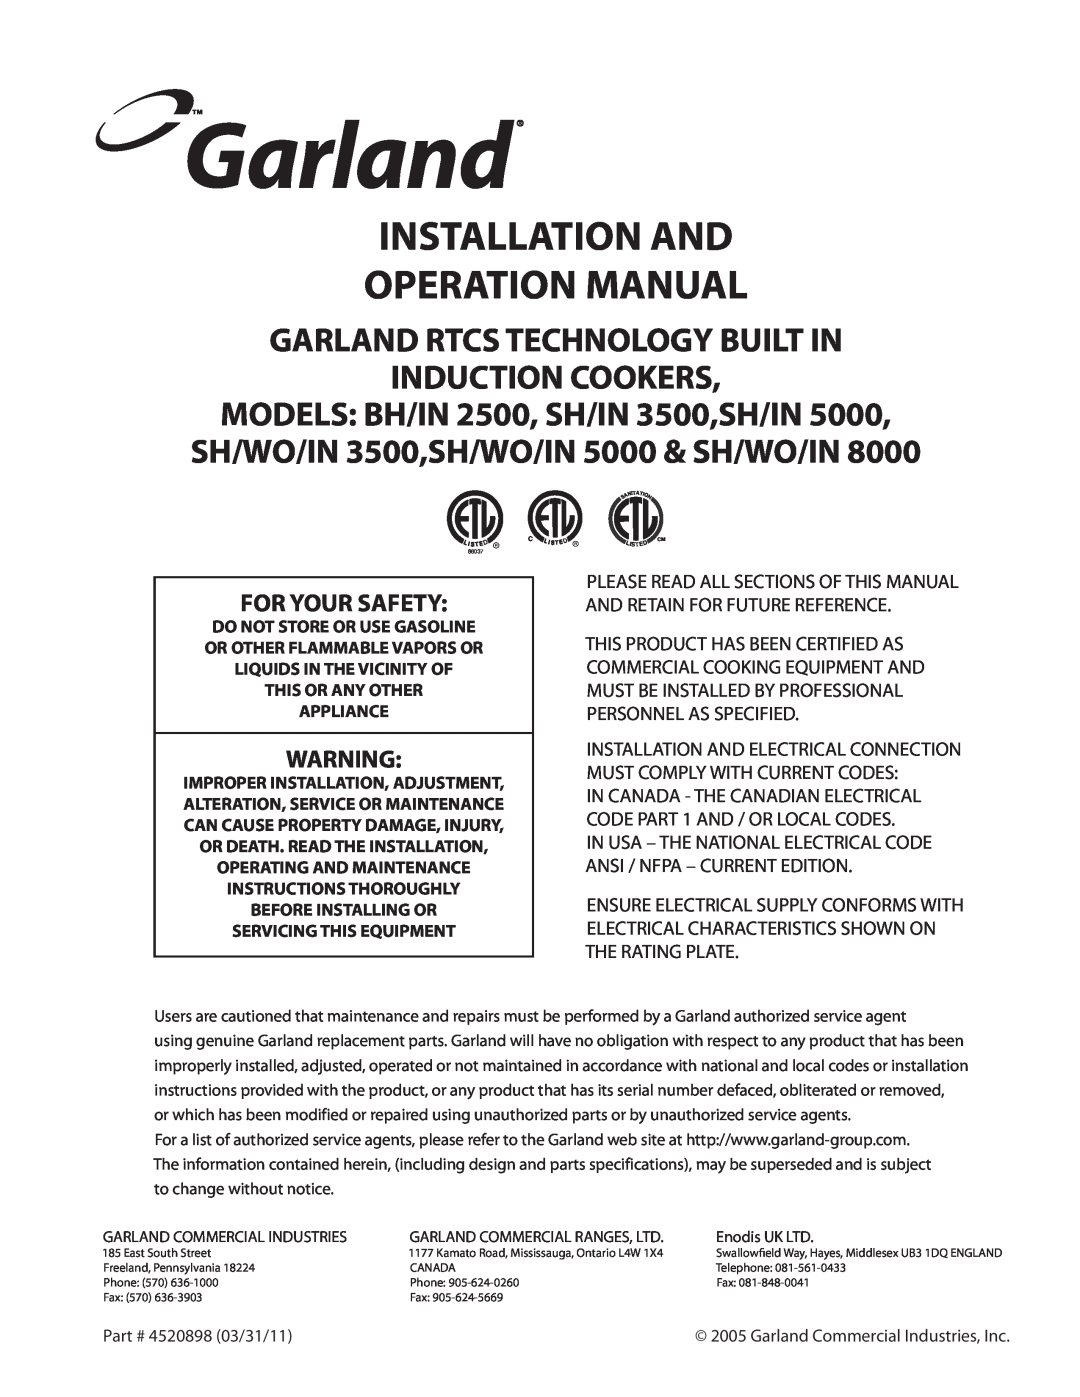 Garland SH/IN 5000 operation manual For Your Safety, Installation And Operation Manual, This Or Any Other Appliance 